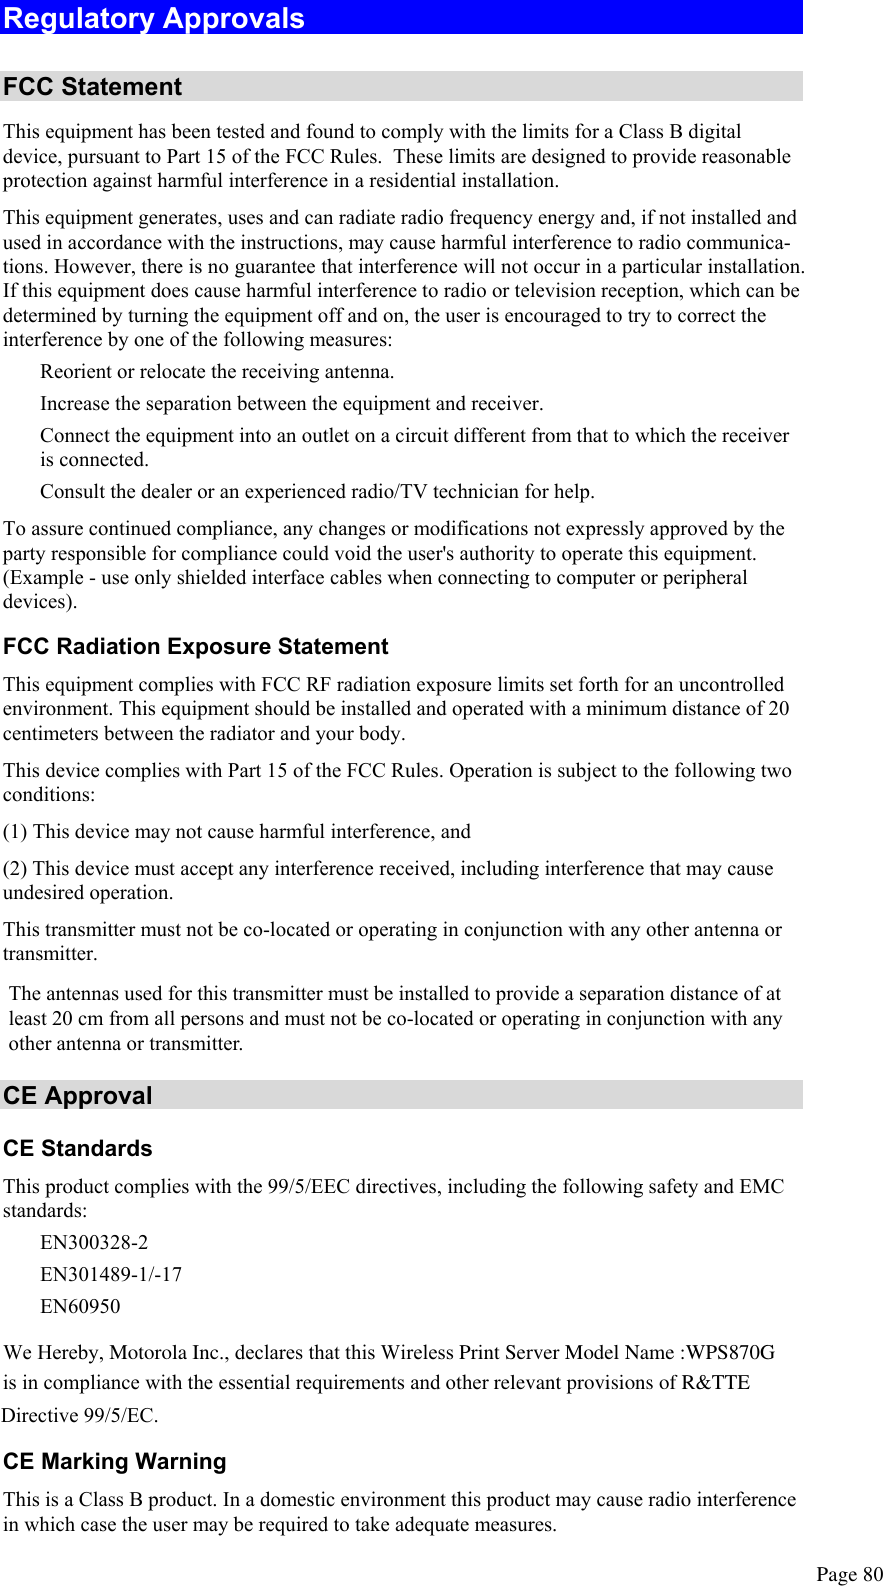  Page 80 Regulatory Approvals  FCC Statement This equipment has been tested and found to comply with the limits for a Class B digital device, pursuant to Part 15 of the FCC Rules.  These limits are designed to provide reasonable protection against harmful interference in a residential installation.  This equipment generates, uses and can radiate radio frequency energy and, if not installed and used in accordance with the instructions, may cause harmful interference to radio communica-tions. However, there is no guarantee that interference will not occur in a particular installation. If this equipment does cause harmful interference to radio or television reception, which can be determined by turning the equipment off and on, the user is encouraged to try to correct the interference by one of the following measures:  Reorient or relocate the receiving antenna.  Increase the separation between the equipment and receiver.  Connect the equipment into an outlet on a circuit different from that to which the receiver is connected.  Consult the dealer or an experienced radio/TV technician for help. To assure continued compliance, any changes or modifications not expressly approved by the party responsible for compliance could void the user&apos;s authority to operate this equipment. (Example - use only shielded interface cables when connecting to computer or peripheral devices). FCC Radiation Exposure Statement This equipment complies with FCC RF radiation exposure limits set forth for an uncontrolled environment. This equipment should be installed and operated with a minimum distance of 20 centimeters between the radiator and your body. This device complies with Part 15 of the FCC Rules. Operation is subject to the following two conditions:  (1) This device may not cause harmful interference, and  (2) This device must accept any interference received, including interference that may cause undesired operation. This transmitter must not be co-located or operating in conjunction with any other antenna or transmitter. CE Approval CE Standards This product complies with the 99/5/EEC directives, including the following safety and EMC standards:  EN300328-2  EN301489-1/-17  EN60950  We Hereby, Motorola Inc., declares that this Wireless Print Server Model Name :WPS870G   is in compliance with the essential requirements and other relevant provisions of R&amp;TTE Directive 99/5/EC.CE Marking Warning This is a Class B product. In a domestic environment this product may cause radio interference in which case the user may be required to take adequate measures. The antennas used for this transmitter must be installed to provide a separation distance of at least 20 cm from all persons and must not be co-located or operating in conjunction with any other antenna or transmitter.